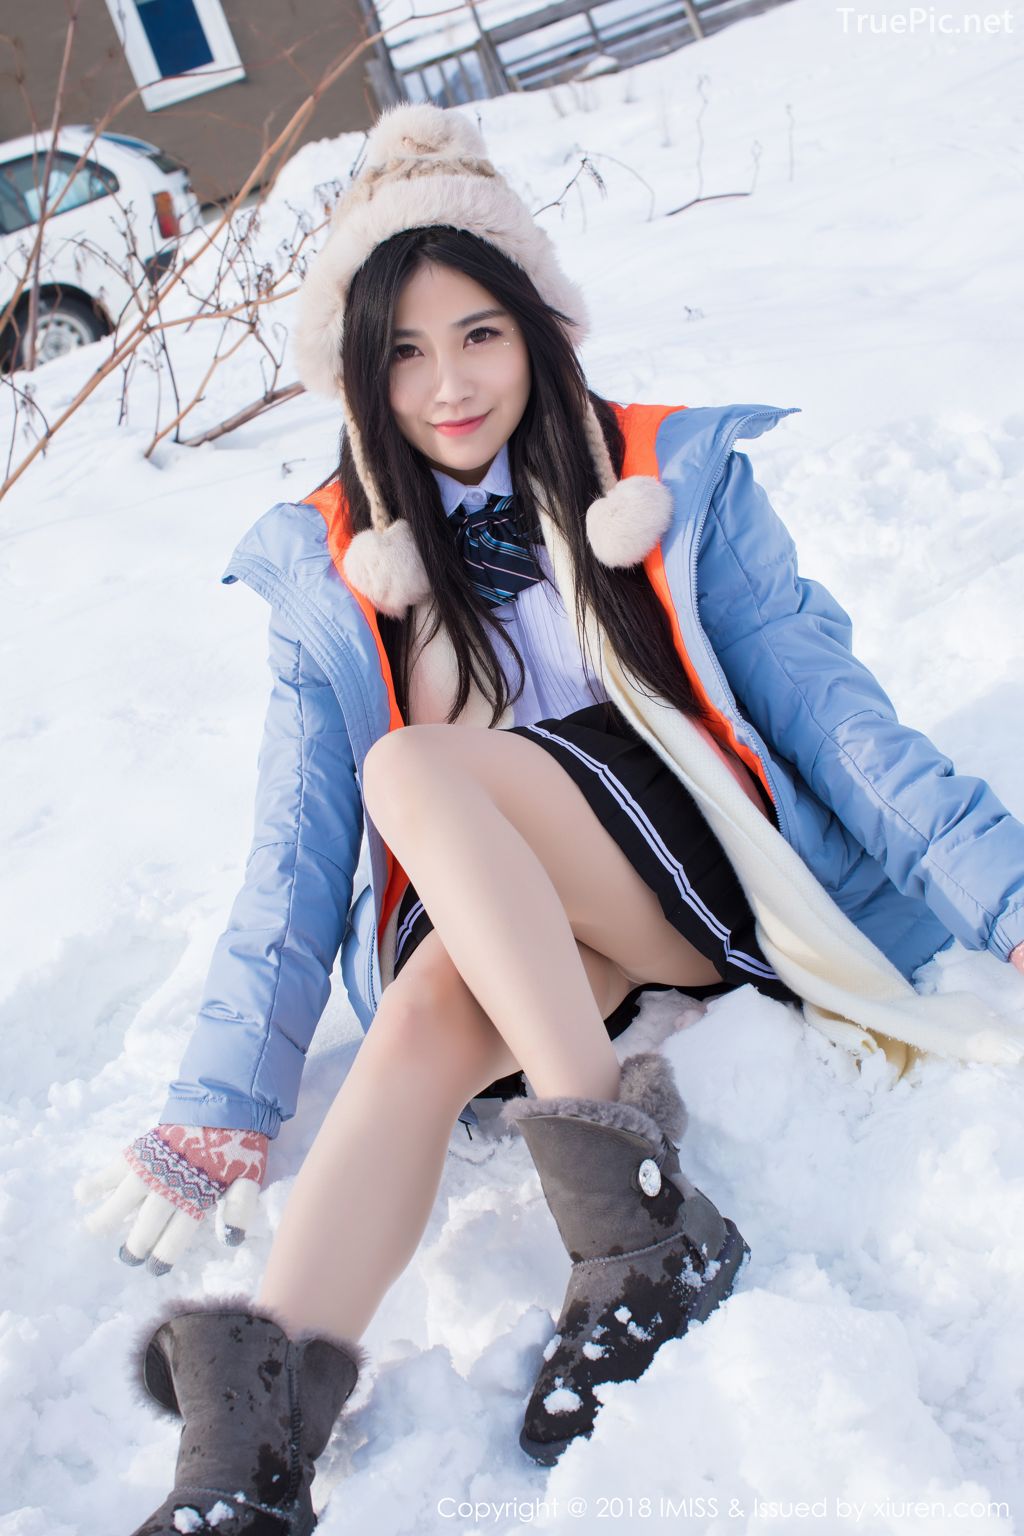 Image-IMISS-Vol.262-Sabrina model–Xu-Nuo-许诺-Sparkling-White-Snow-TruePic.net- Picture-14